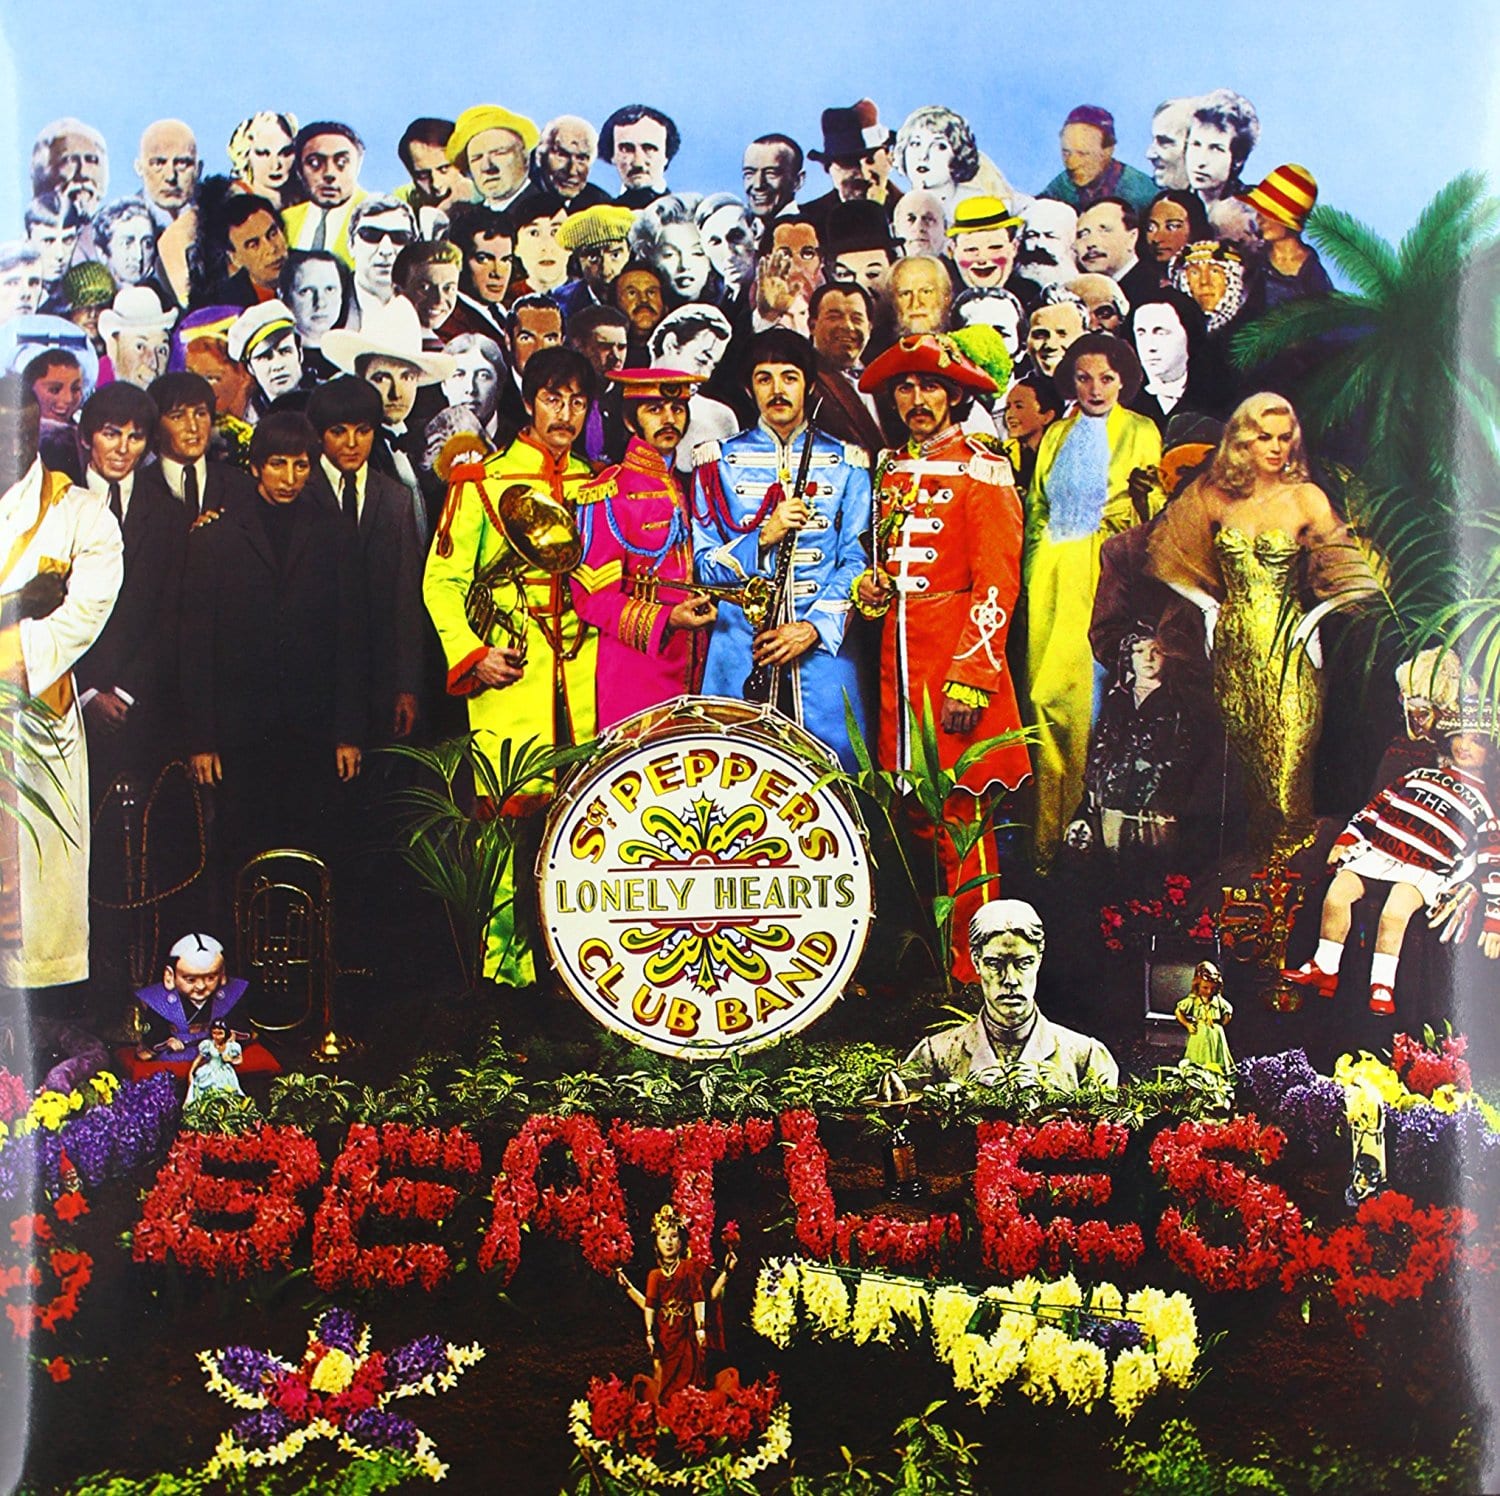 sgt-peppers-lonely-hearts-club-band-beatles-vinyl-2017-2018